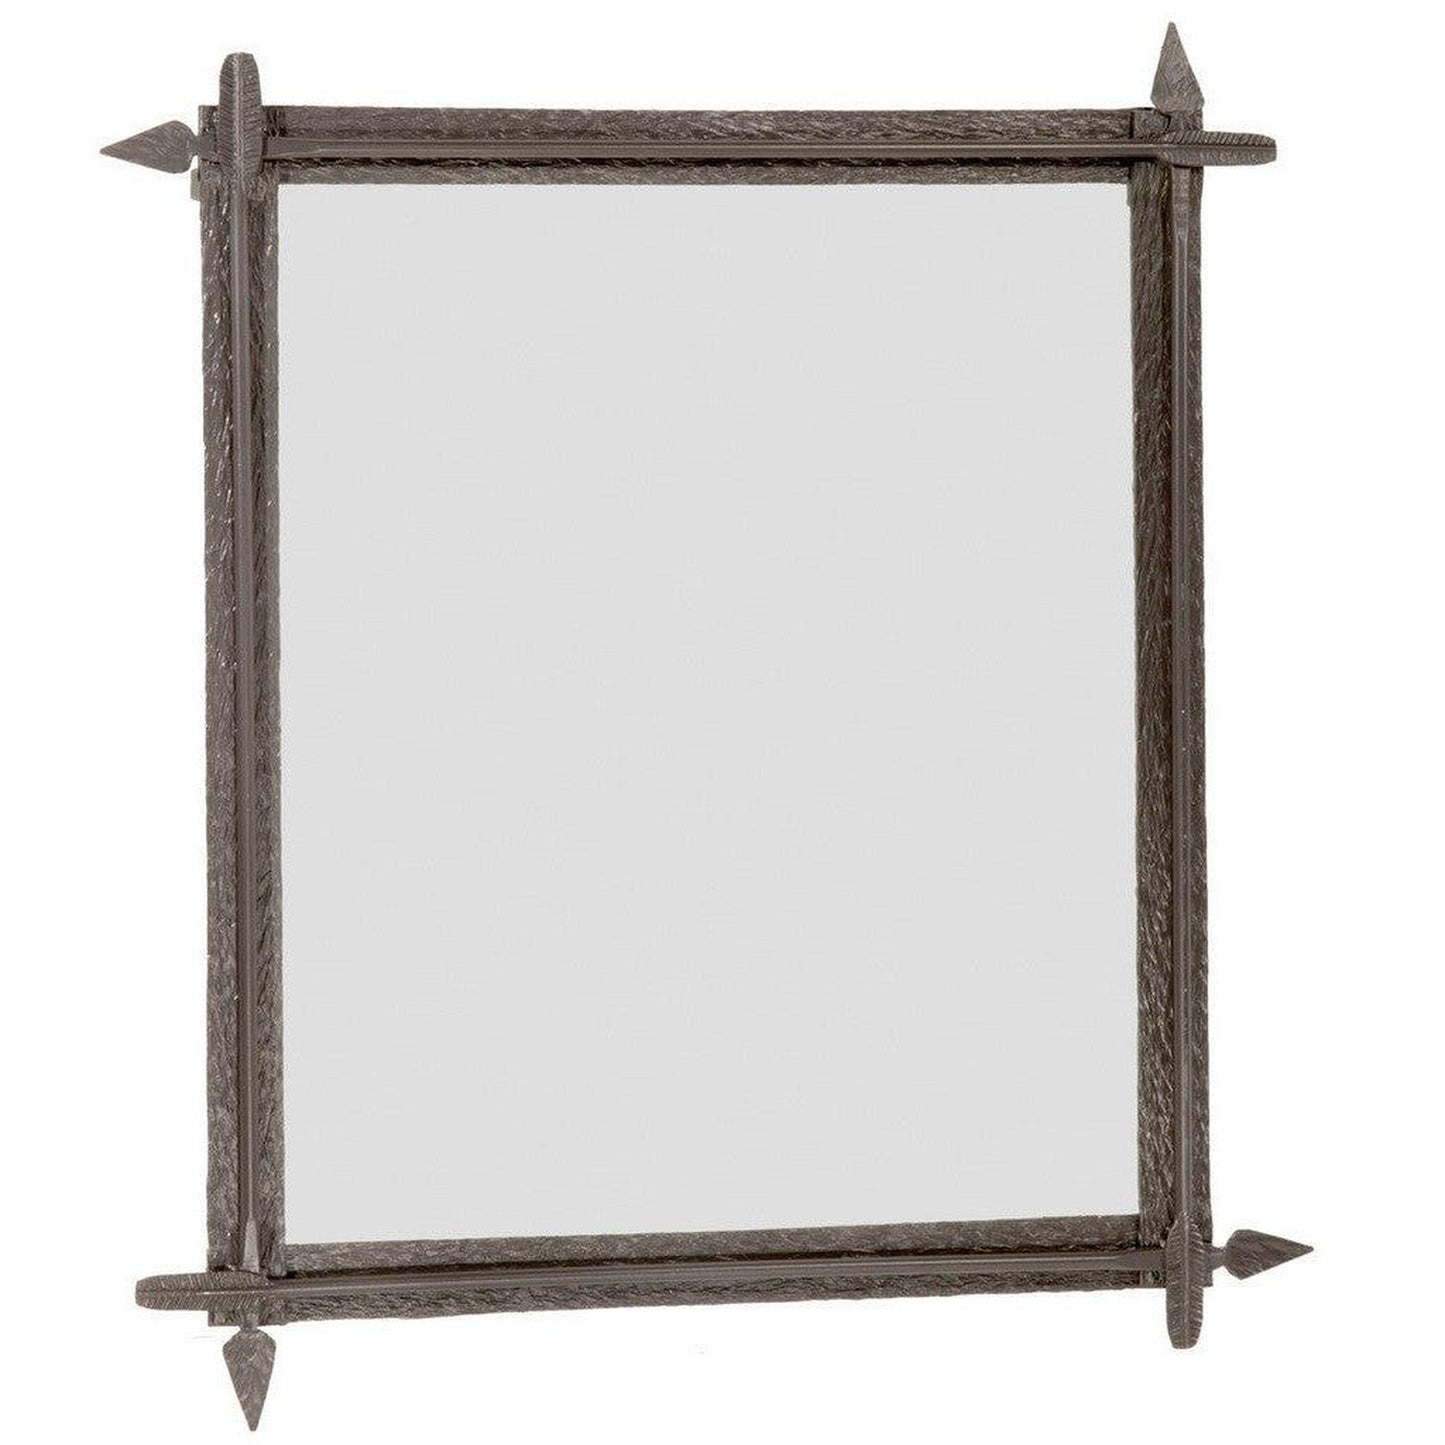 Stone County Ironworks Quapaw 31" x 43" Large Natural Black Iron Wall Mirror With Gold Iron Accent